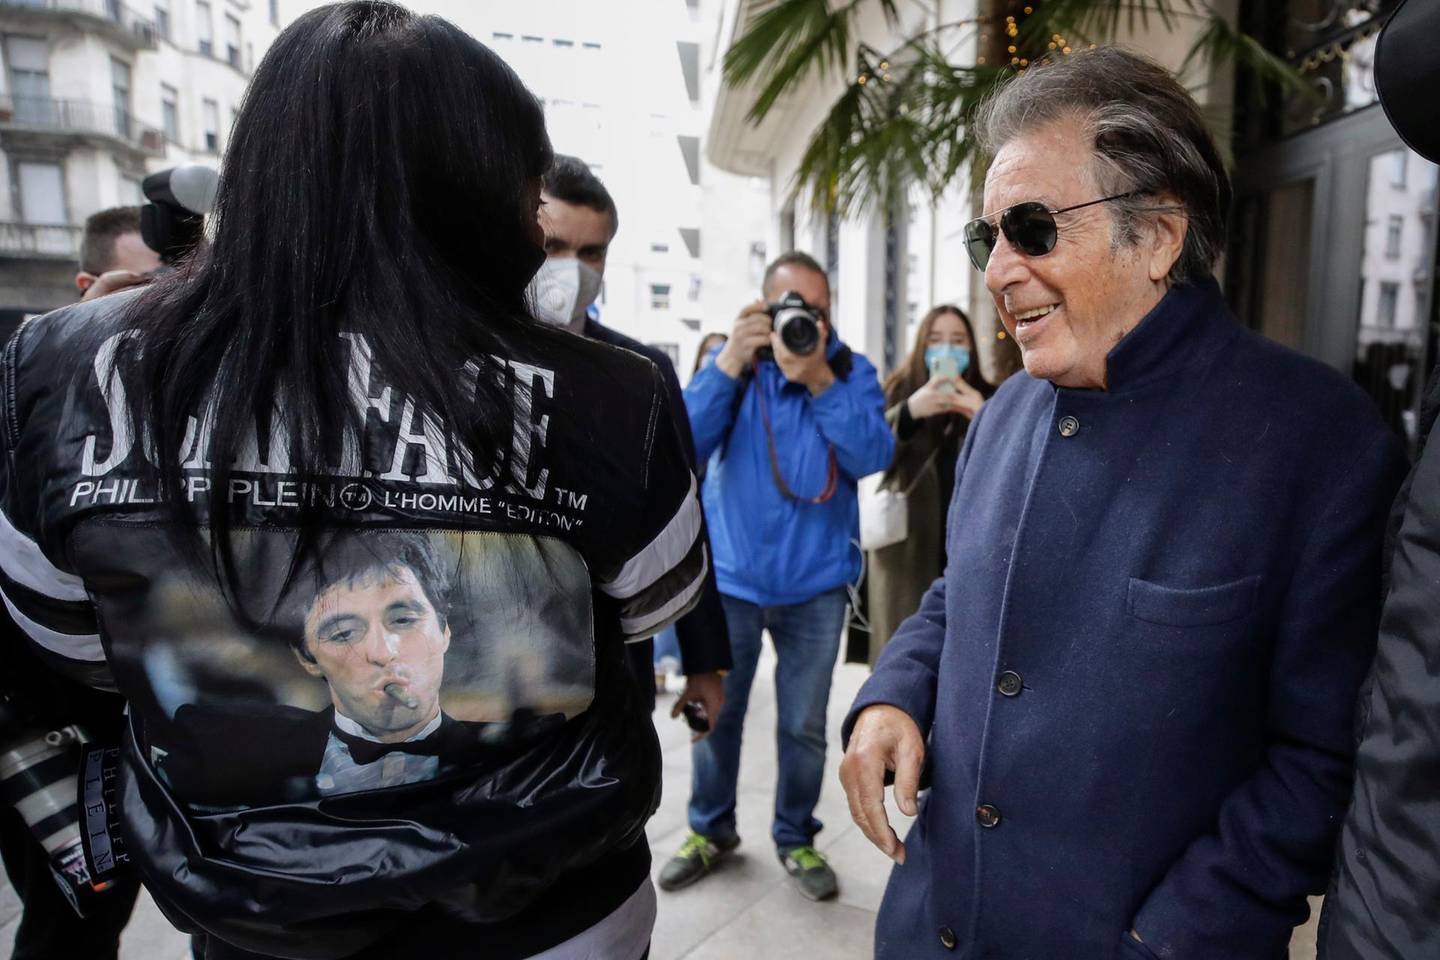 FILE - Al Pacino, who plays Aldo Gucci in Ridley Scott's movie based on the story of the murder of Maurizio Gucci in 1995, being filmed mainly in Milan and Rome, leaves Palazzo Parigi as Italian entrepreneur Stefania Nobile shows Pacino her leather jacket with the picture of the Scarface movie, in Milan, Italy, Thursday, March 11, 2021. The great-grandchildren of Guccio Gucci, who founded the luxury brand nearly a century ago in Florence, are appealing to filmmaker Ridley Scott to respect their familyâ€™s legacy in the film that focuses on the sensational murder. (AP Photo/Luca Bruno)